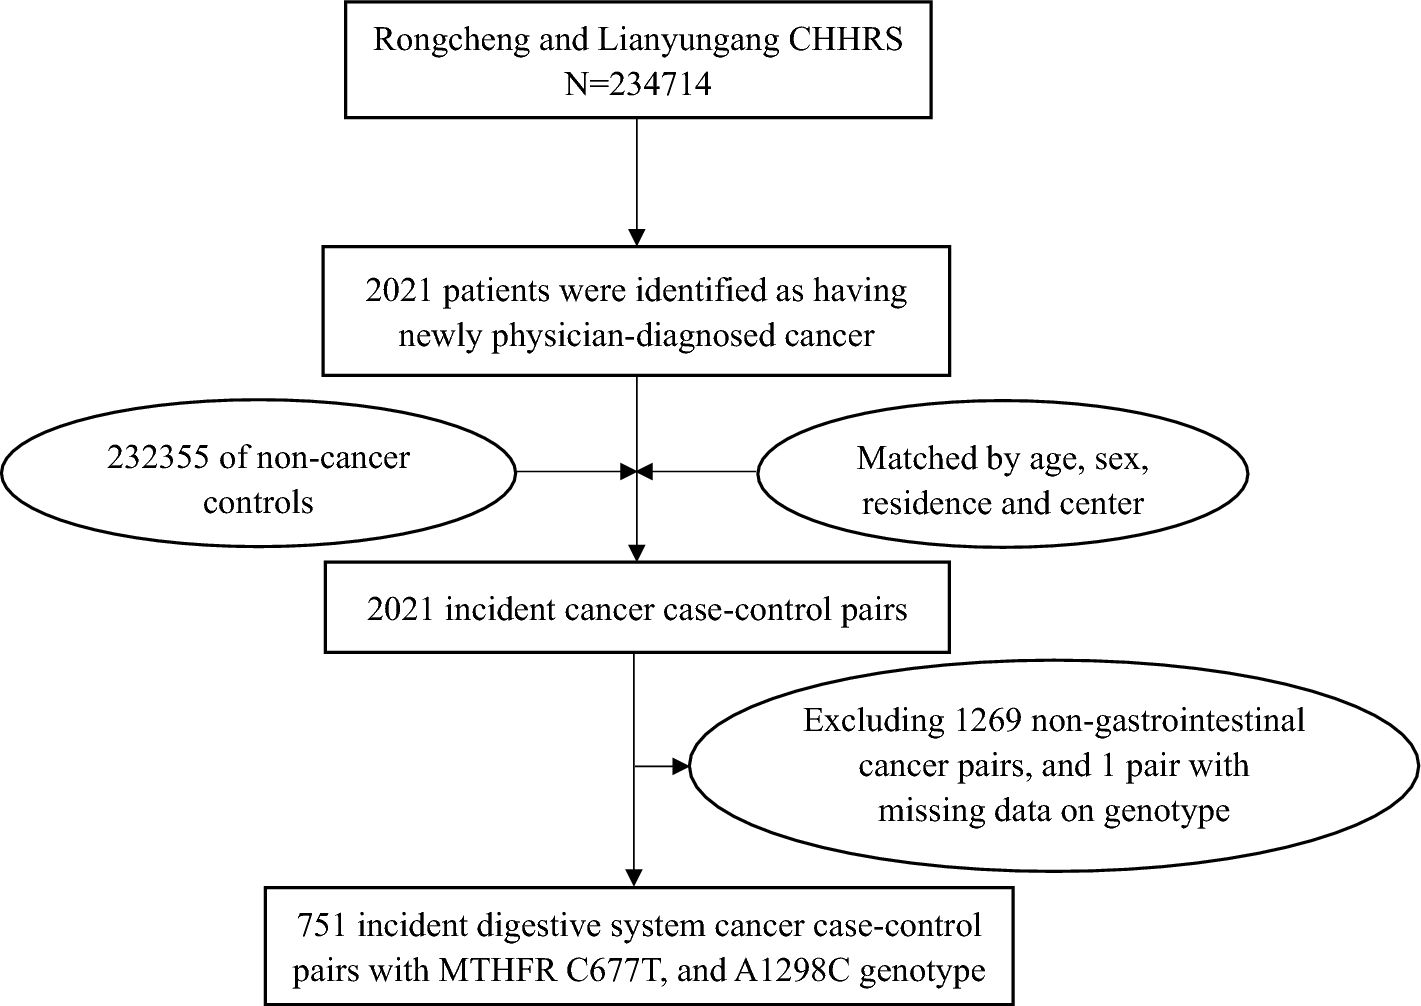 The combined effect of MTHFR C677T and A1298C polymorphisms on the risk of digestive system cancer among a hypertensive population